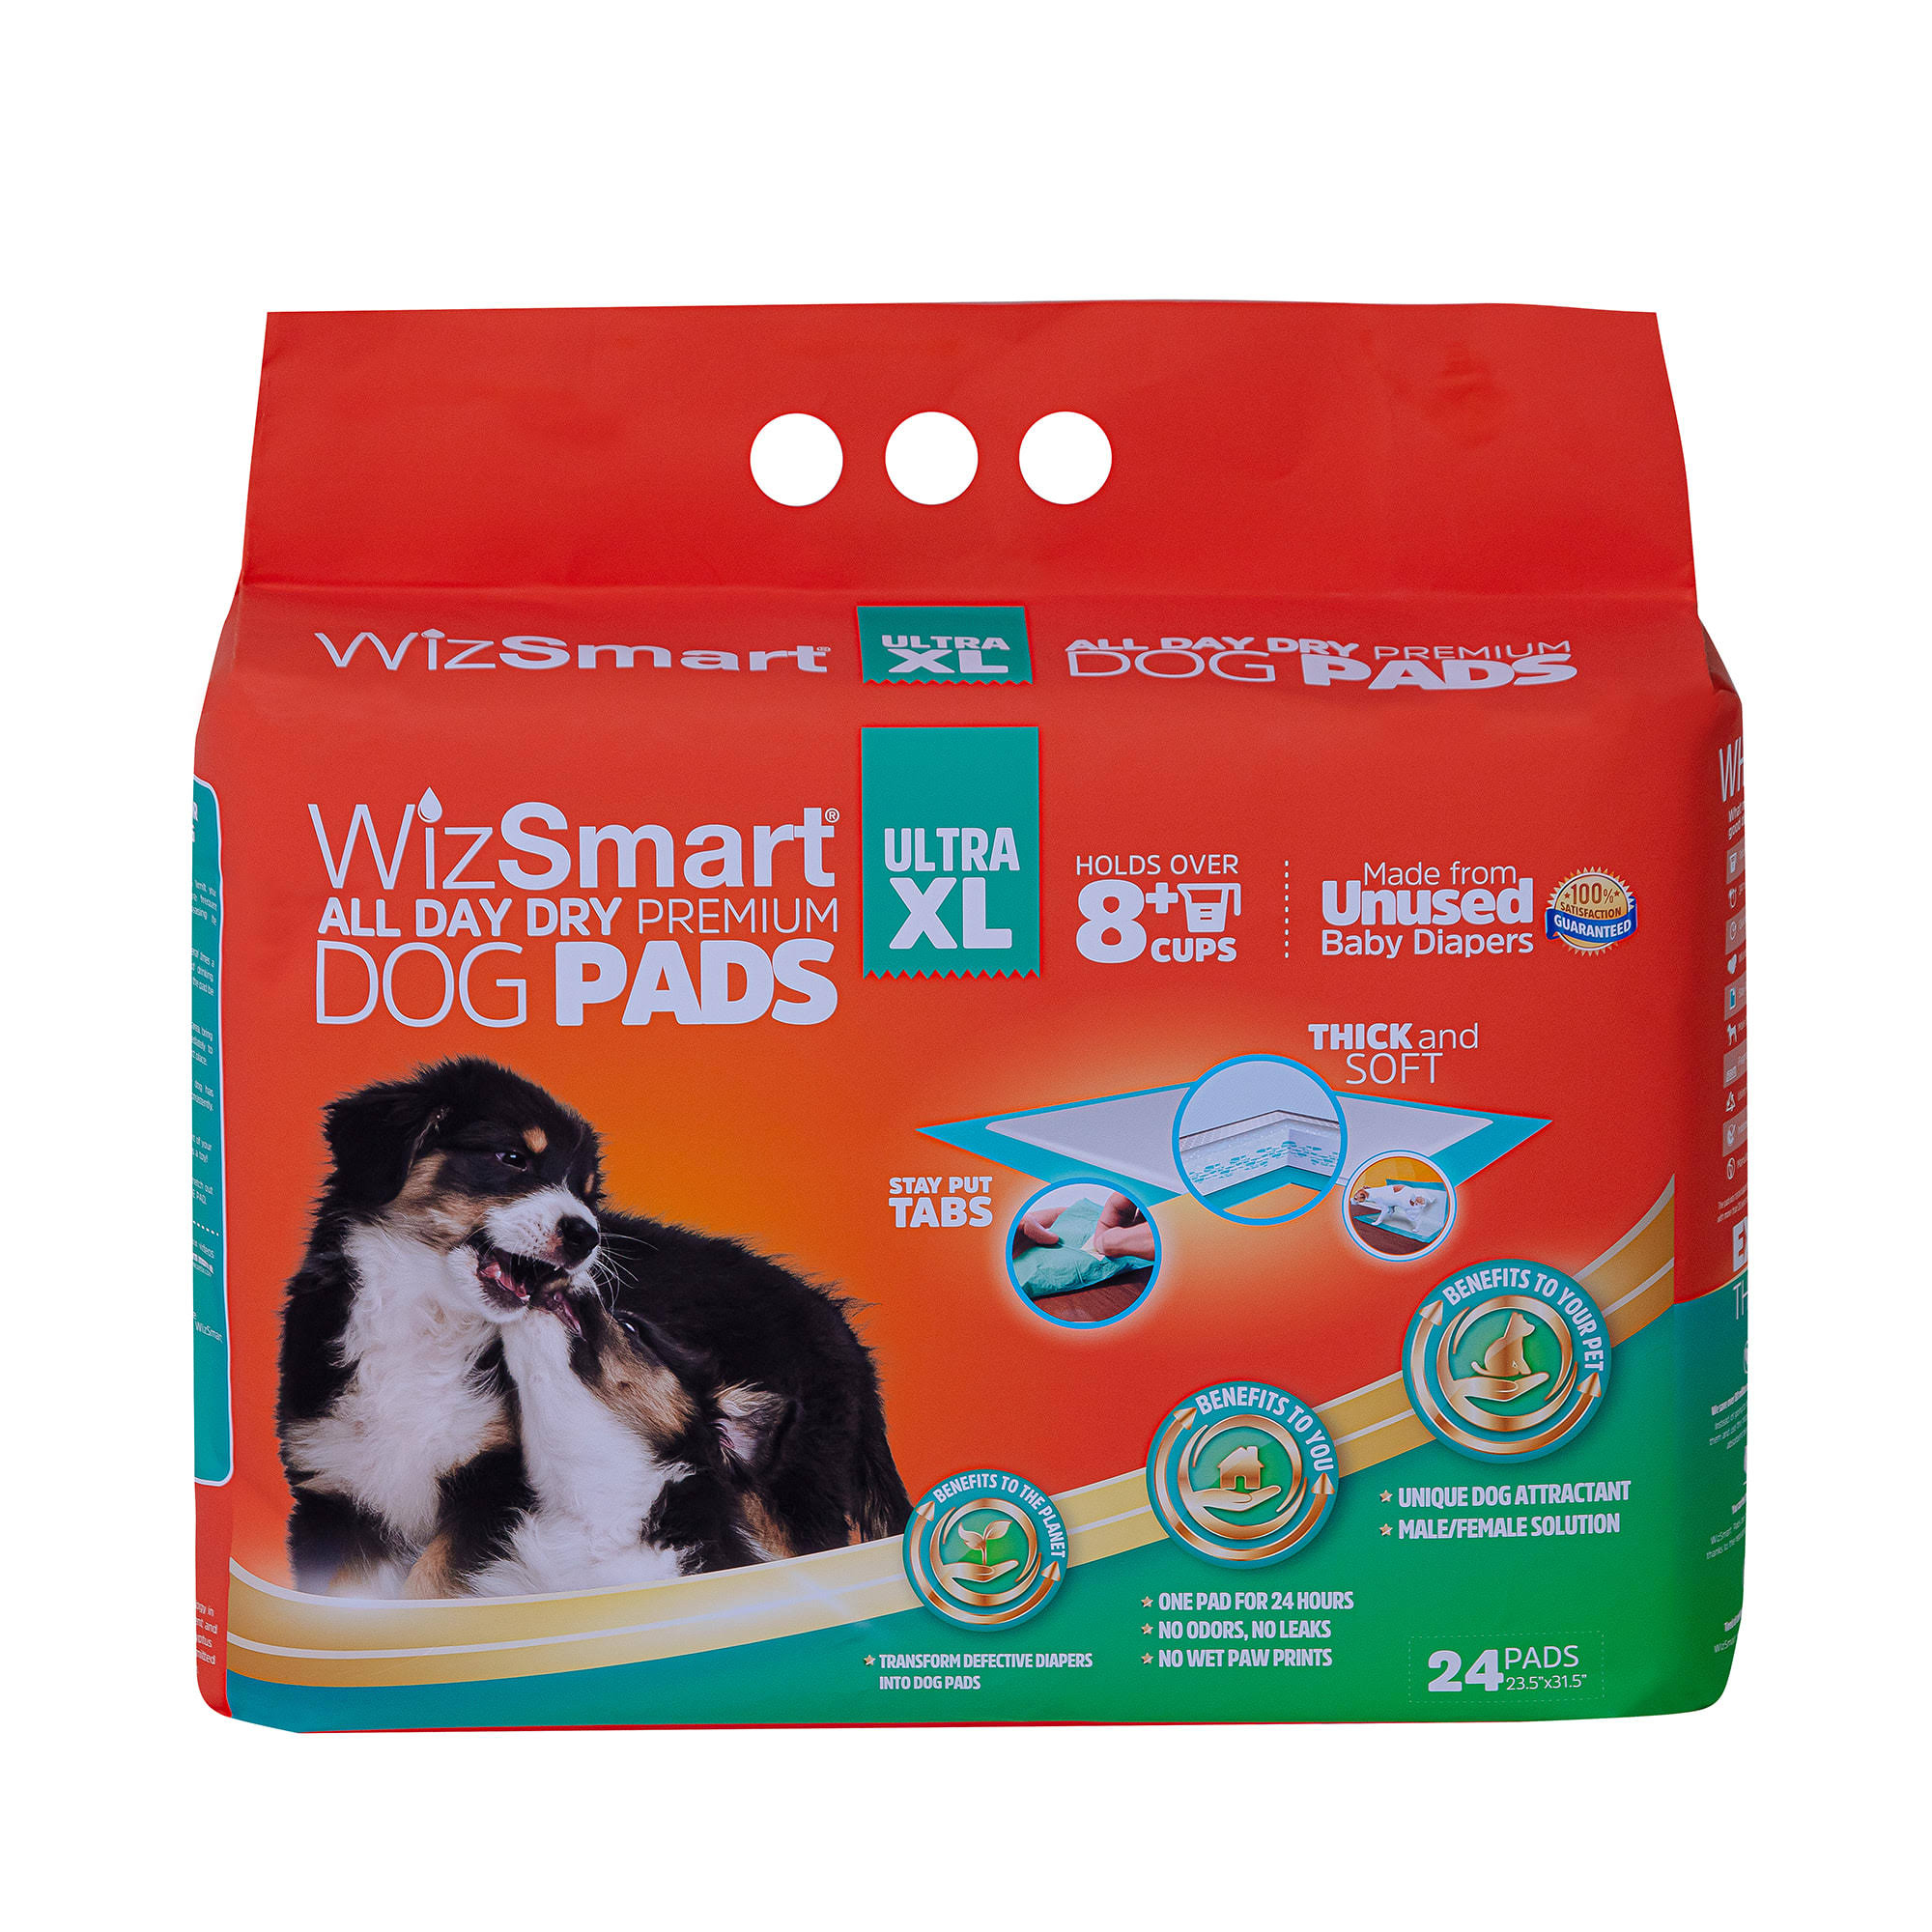 WizSmart All Day Dry Dog Pads Ultra XL 24 COUNT.